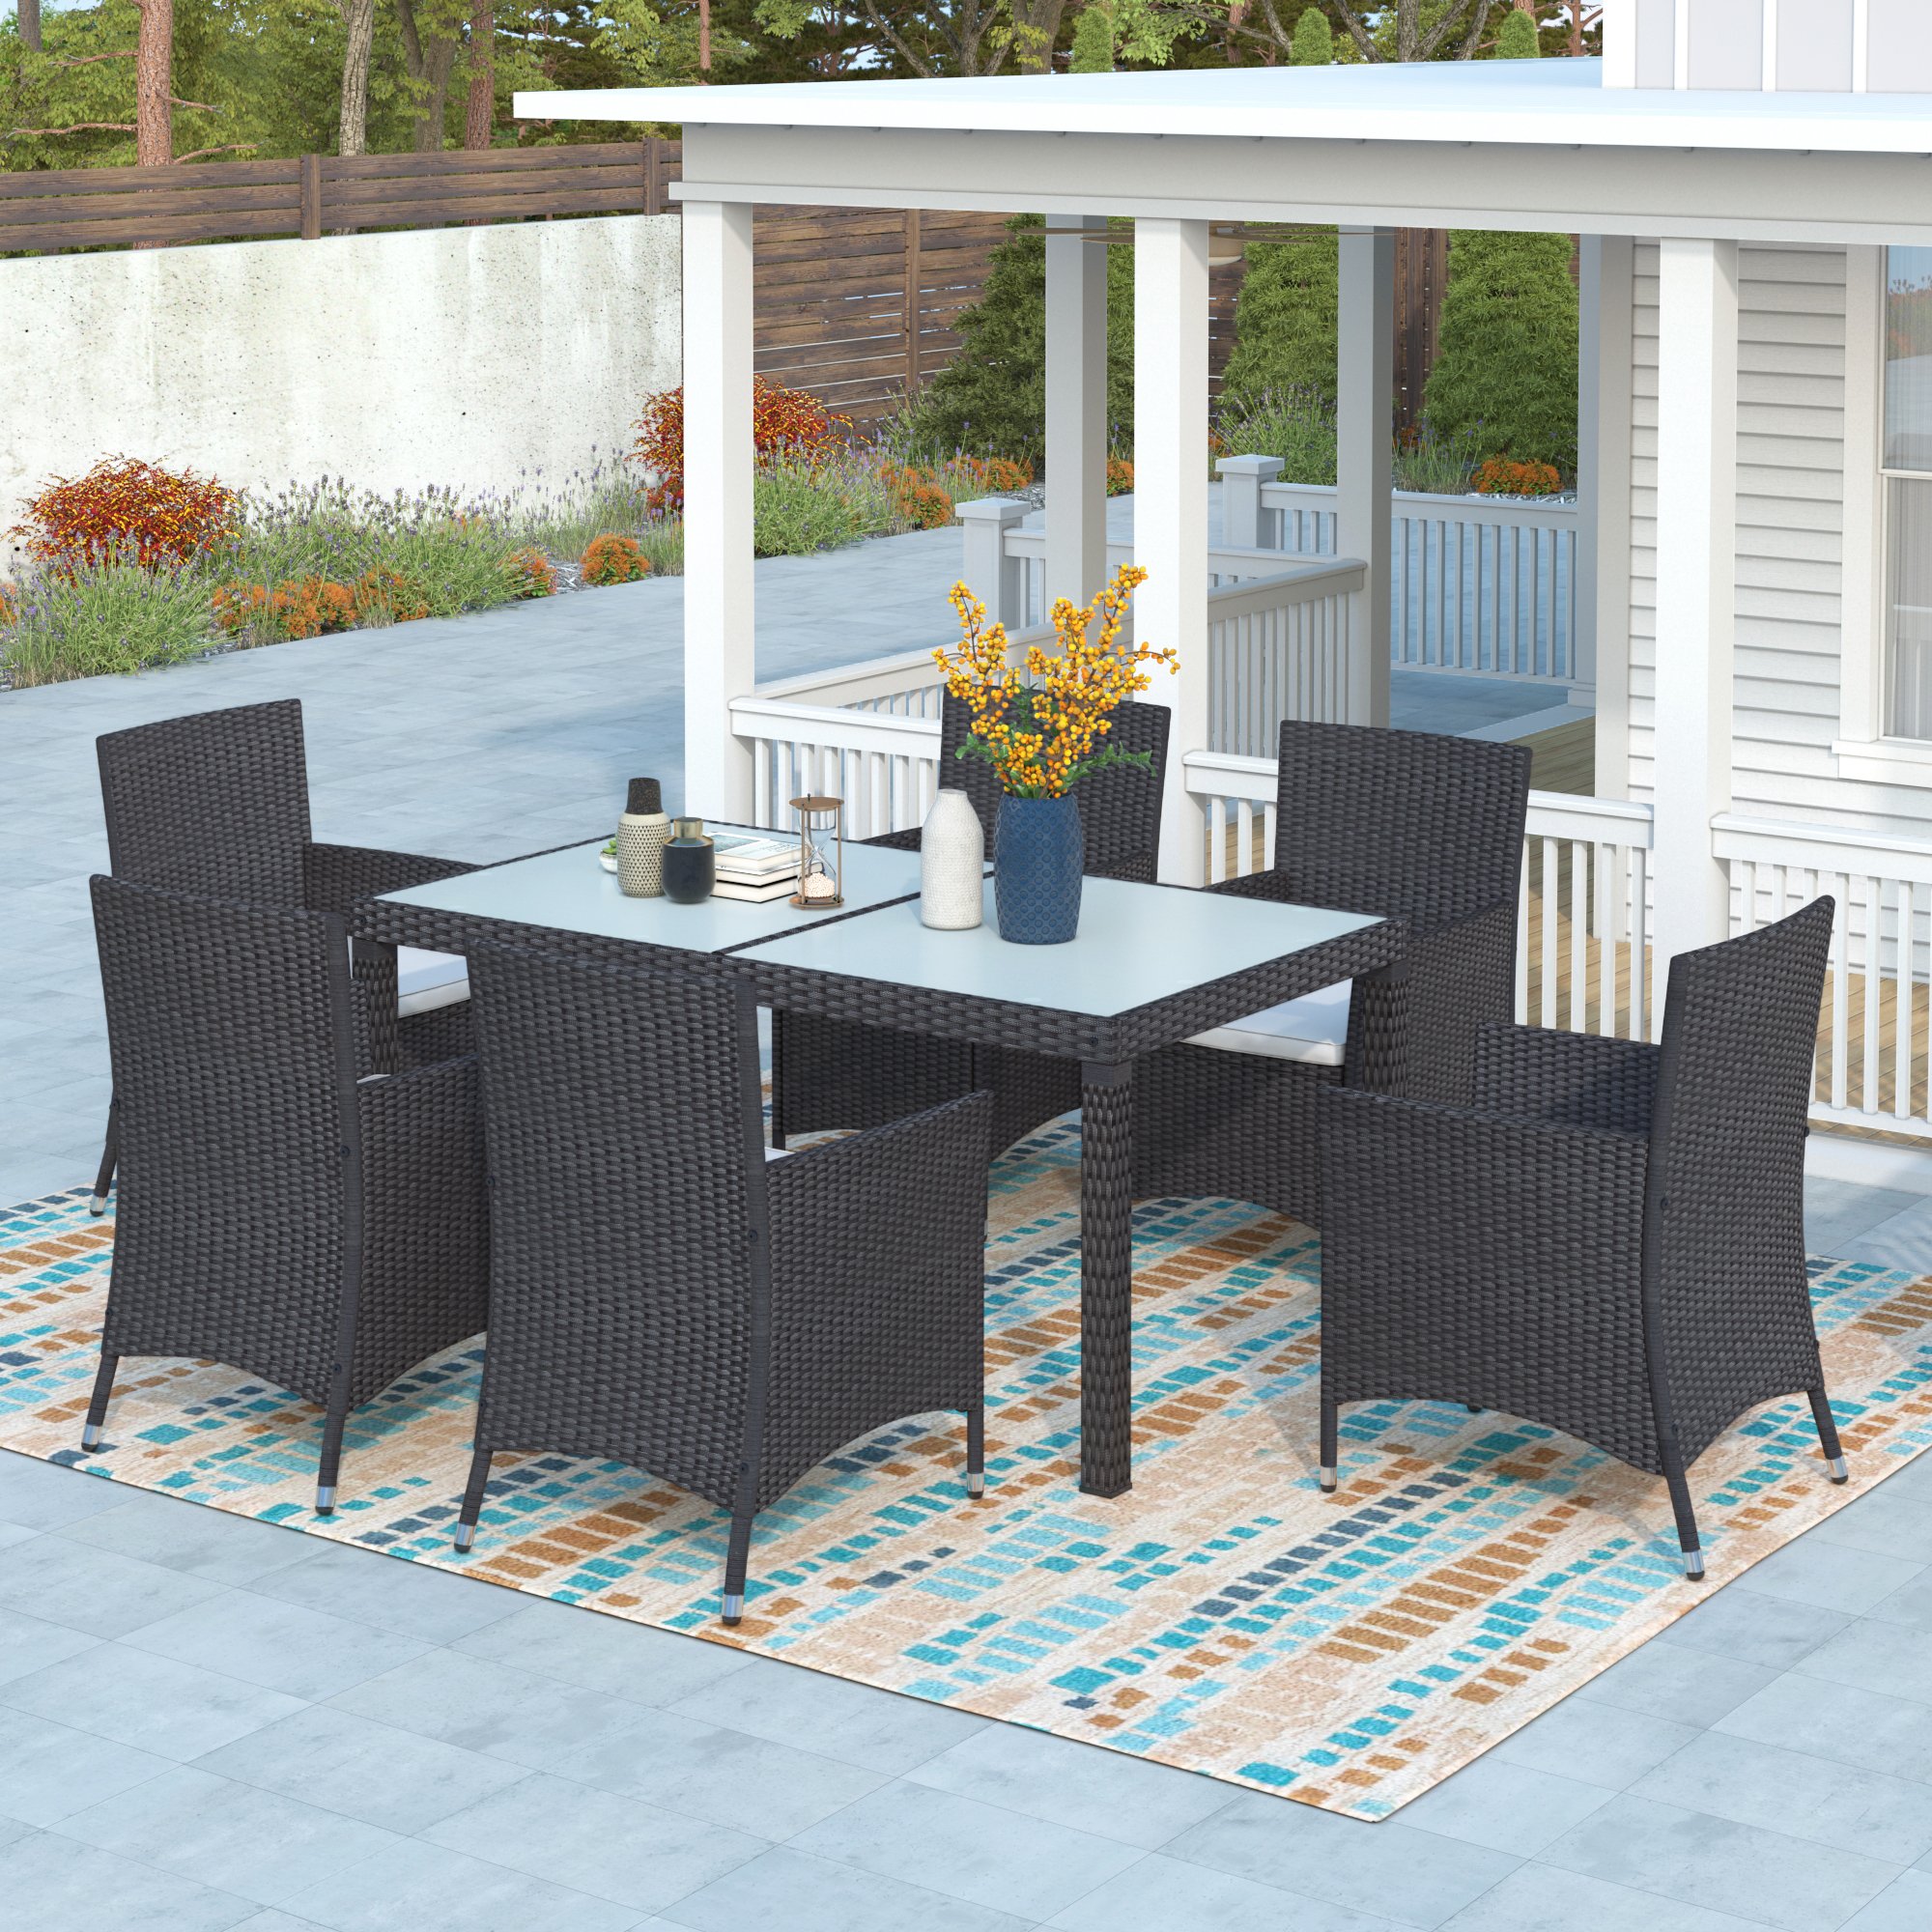 7-piece Outdoor Wicker Dining set - Dining table set for 7 - Patio Rattan Furniture Set with Beige Cushion (Black)-CASAINC